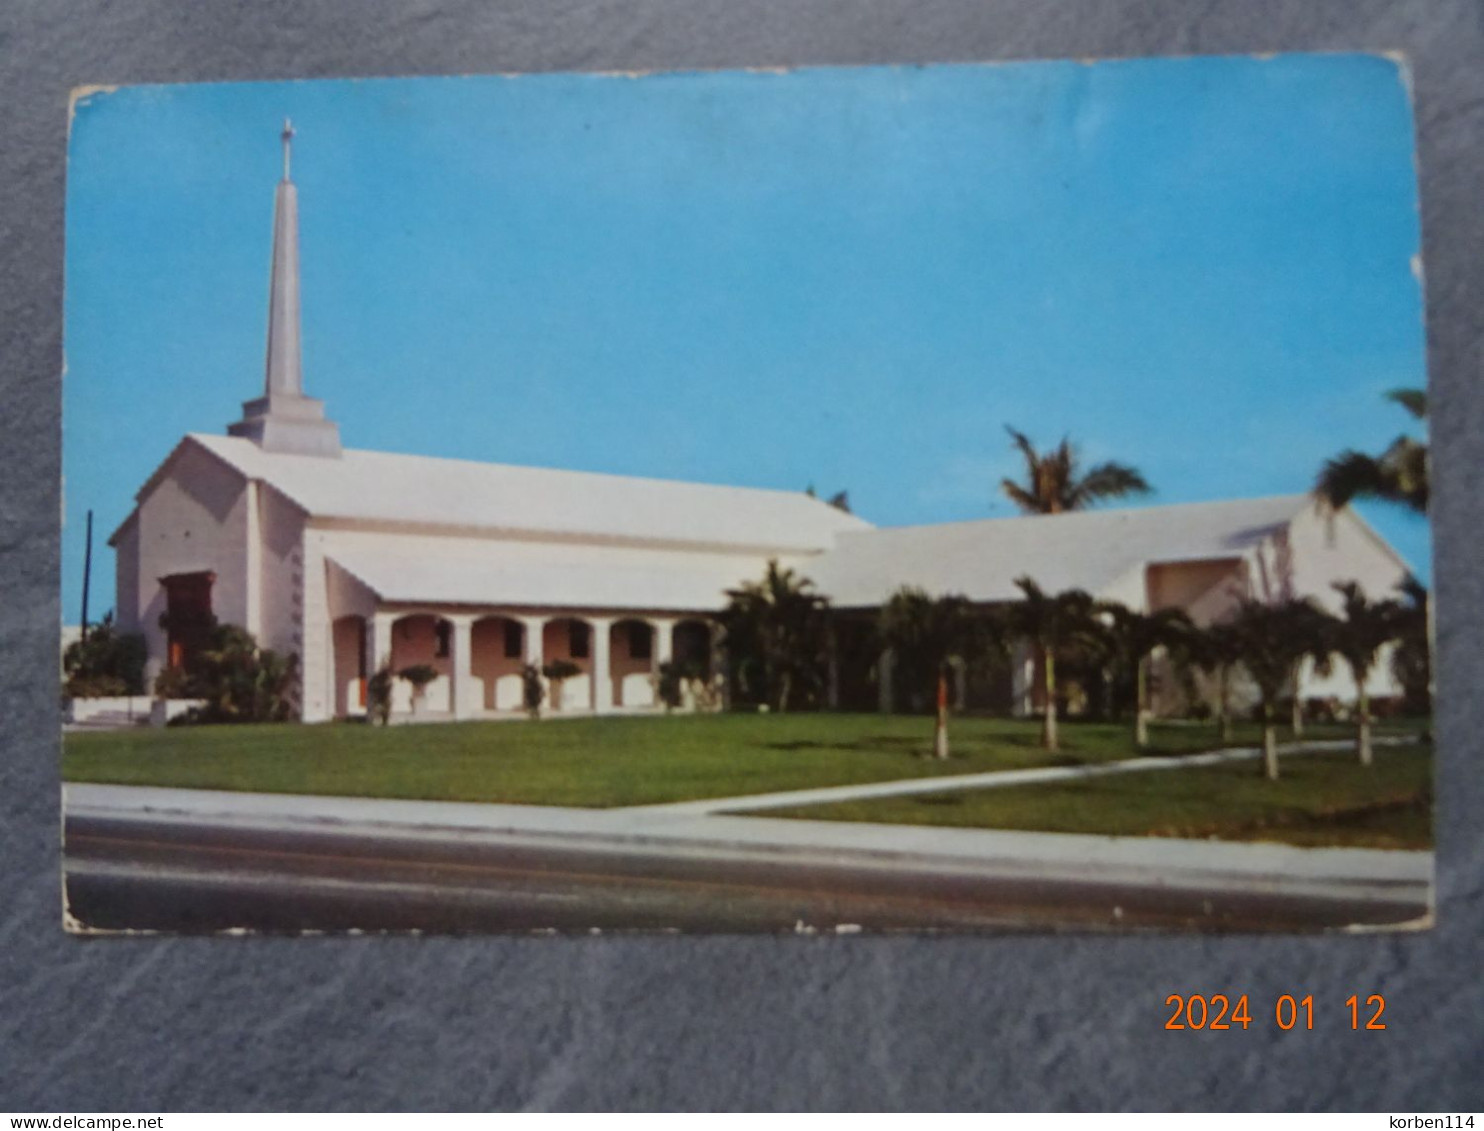 CHURCH BY THE SEA - Fort Lauderdale